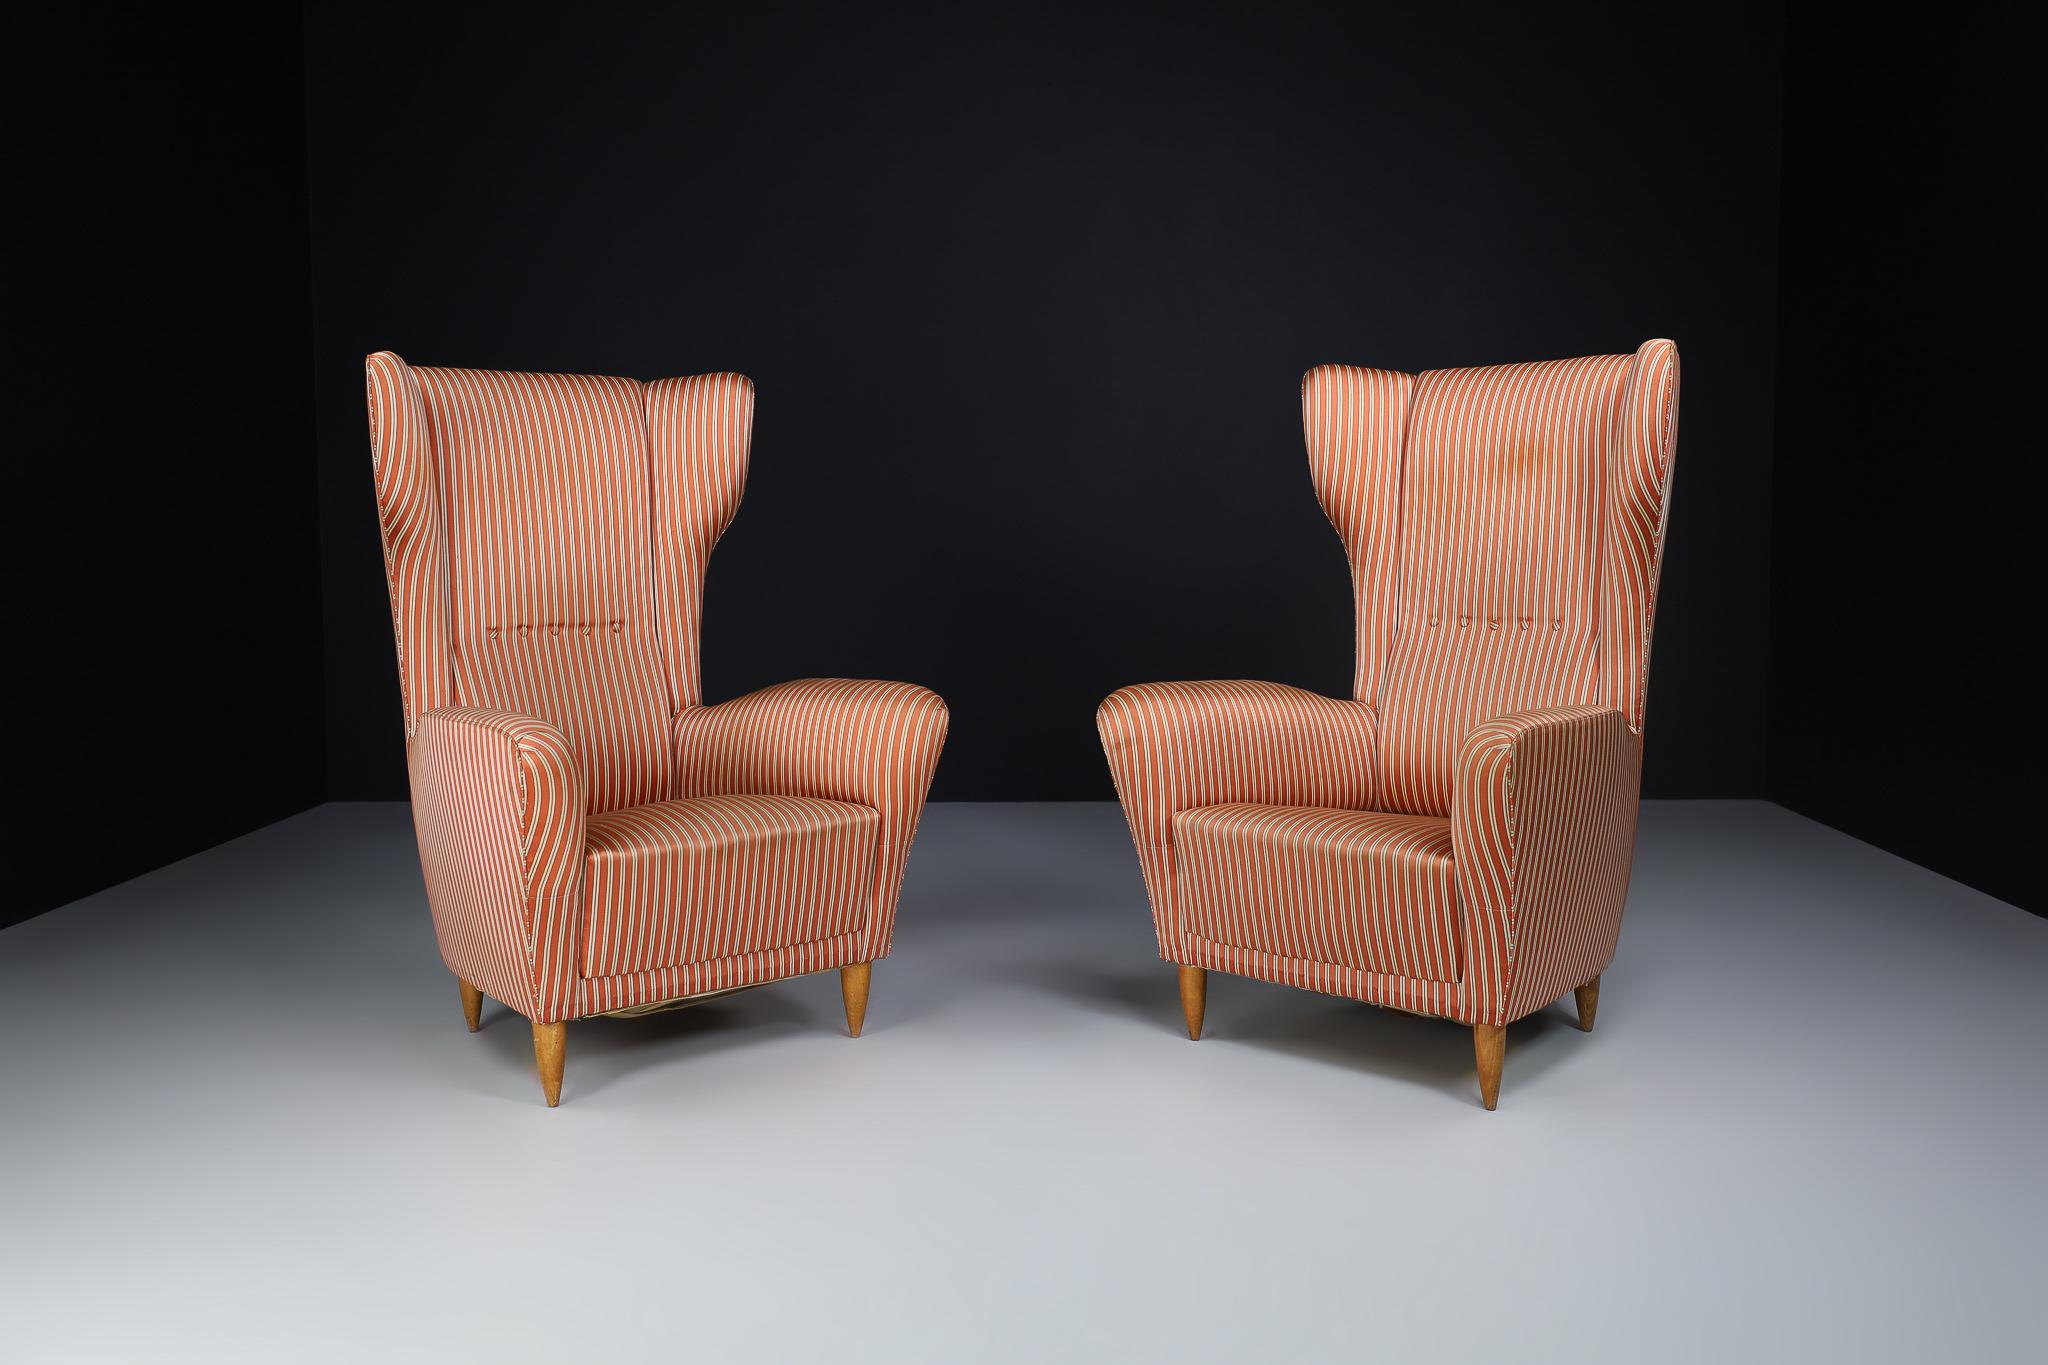 Pair of original high back lounge chairs made and designed in the style of Federico Munari and Gio Ponti in Italy 1940s. This elegant set of lounge chairs features wings and curved armrests. Thanks to its elegant armrests and seating, the chair gets